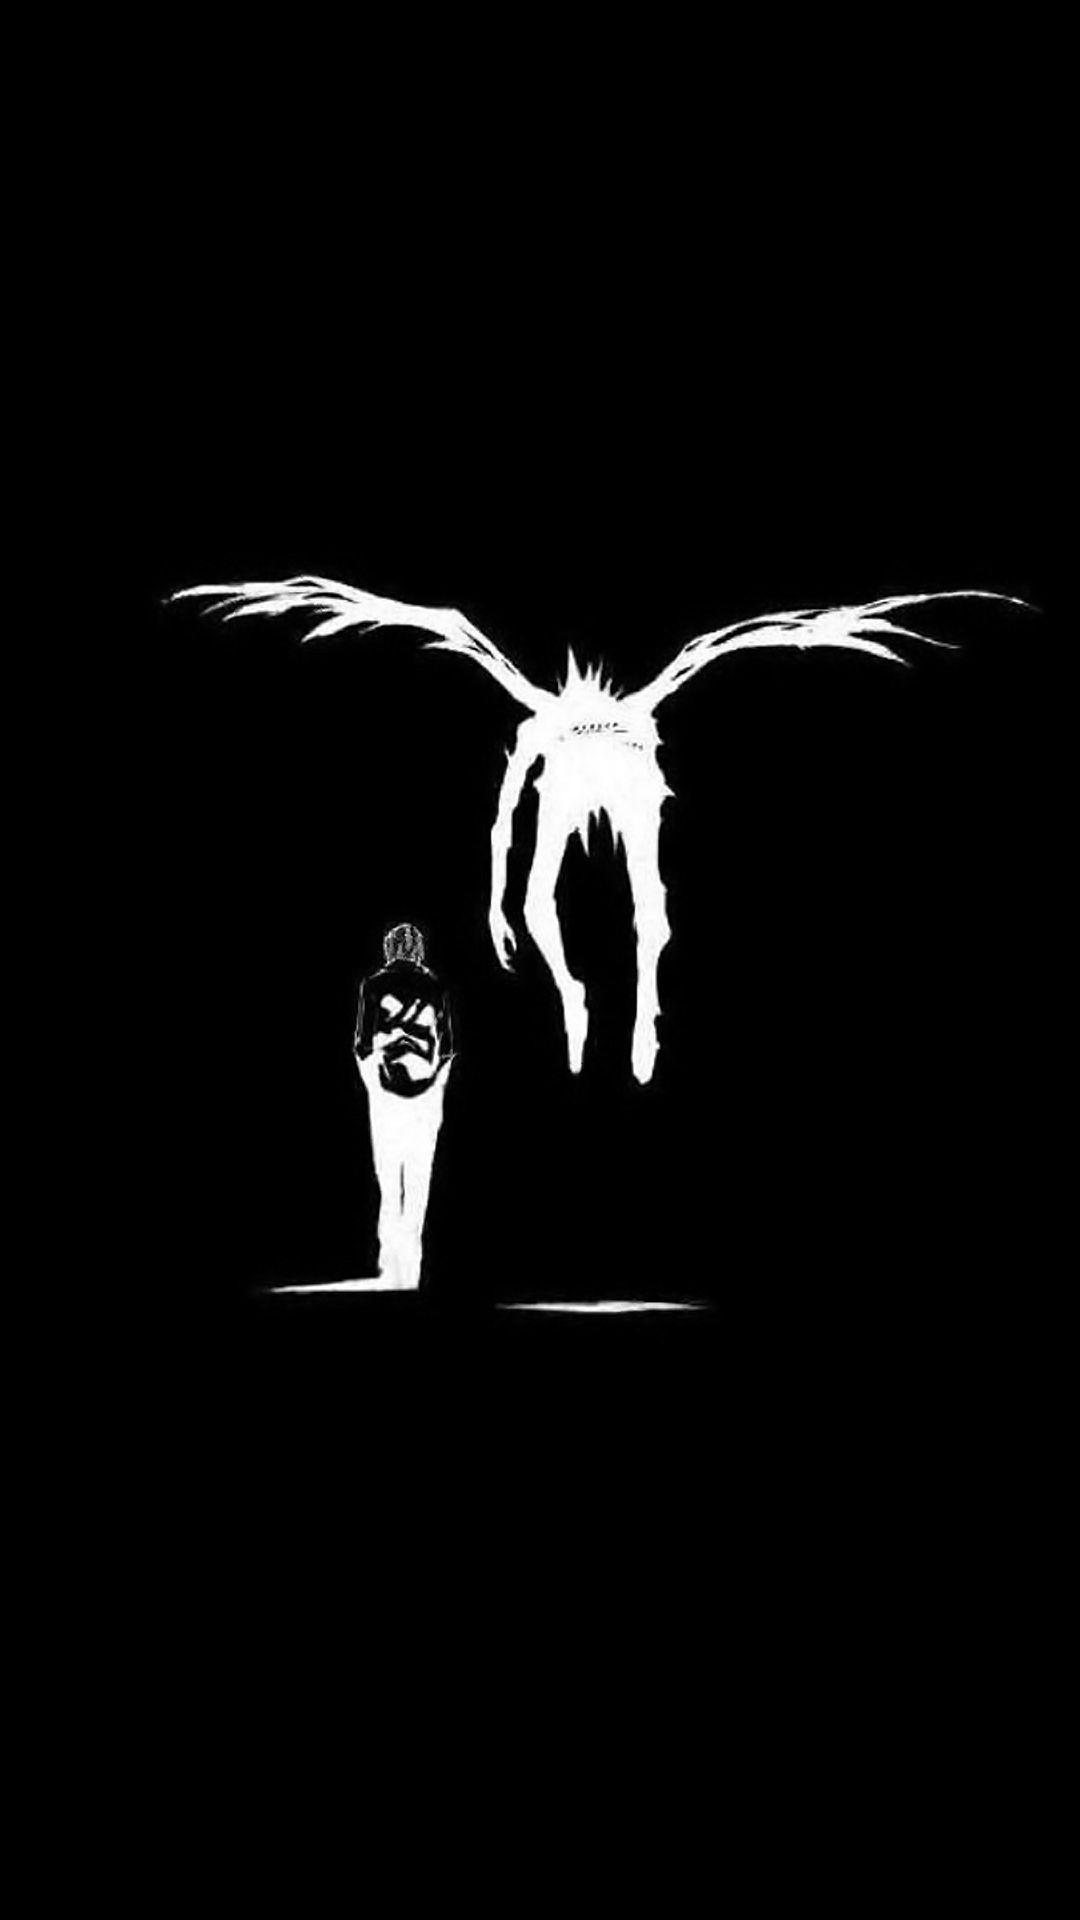 Death Note Iphone X Wallpapers Wallpaper Cave Death note, yagami light, anime, lawliet l, amane misa, ryuk. death note iphone x wallpapers